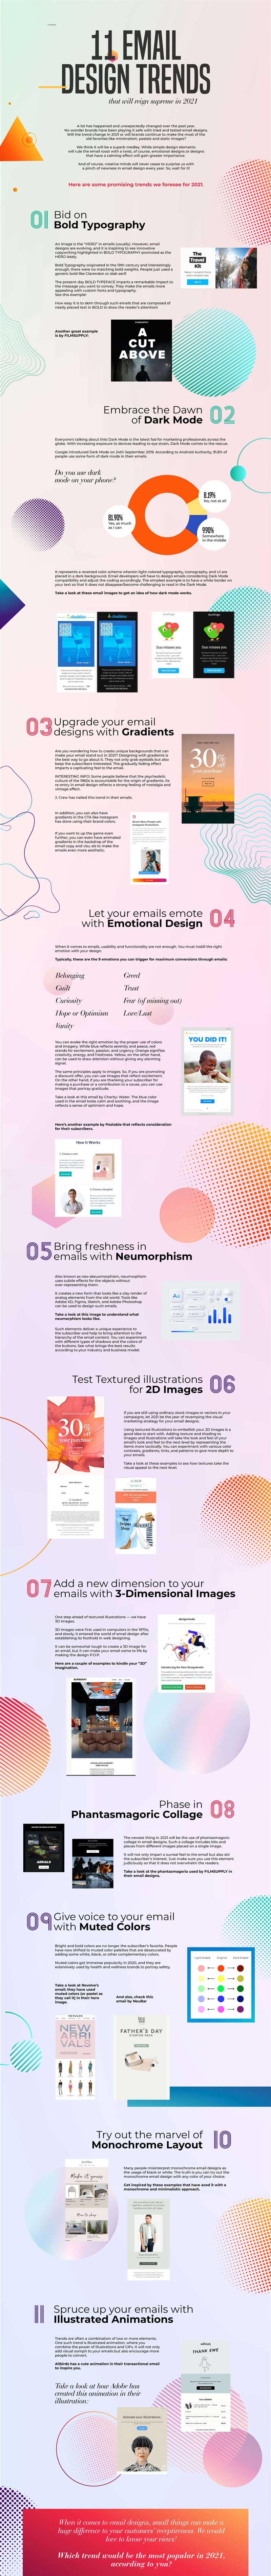 Email Design Trends 2021